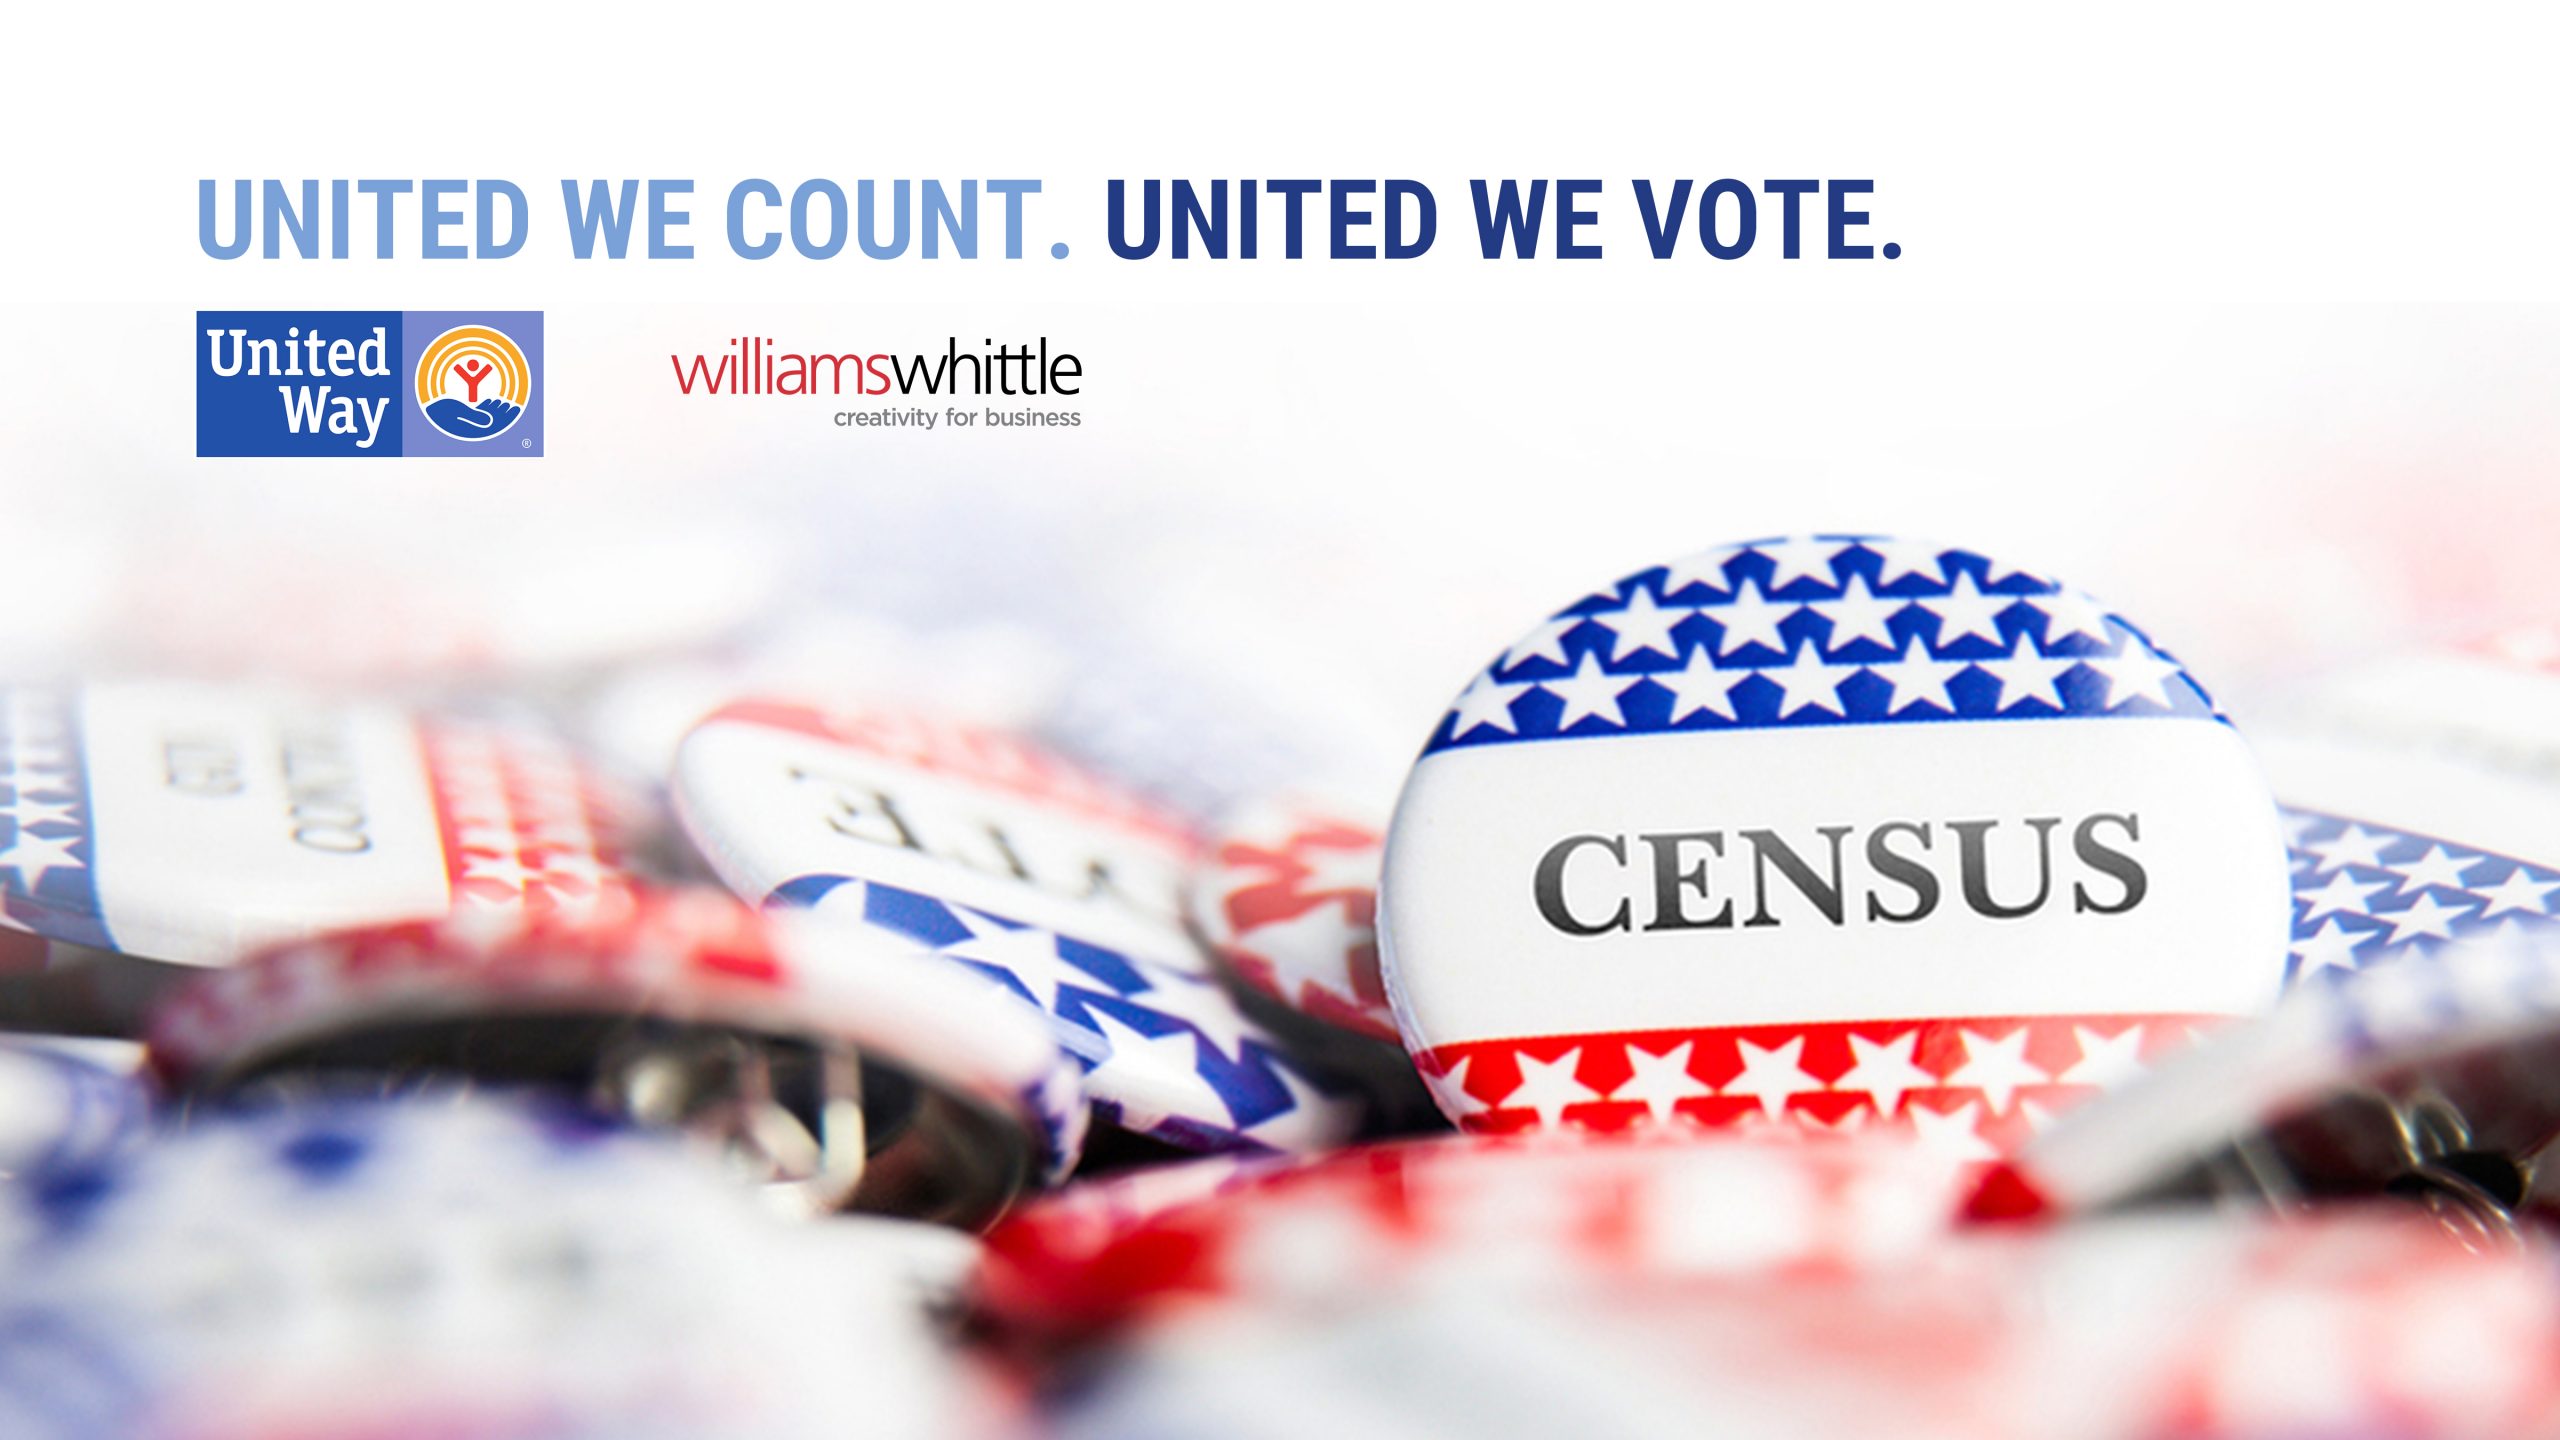 United Way Selects Williams Whittle for U.S. Census PSA Supporting Hard-to-Count Communities